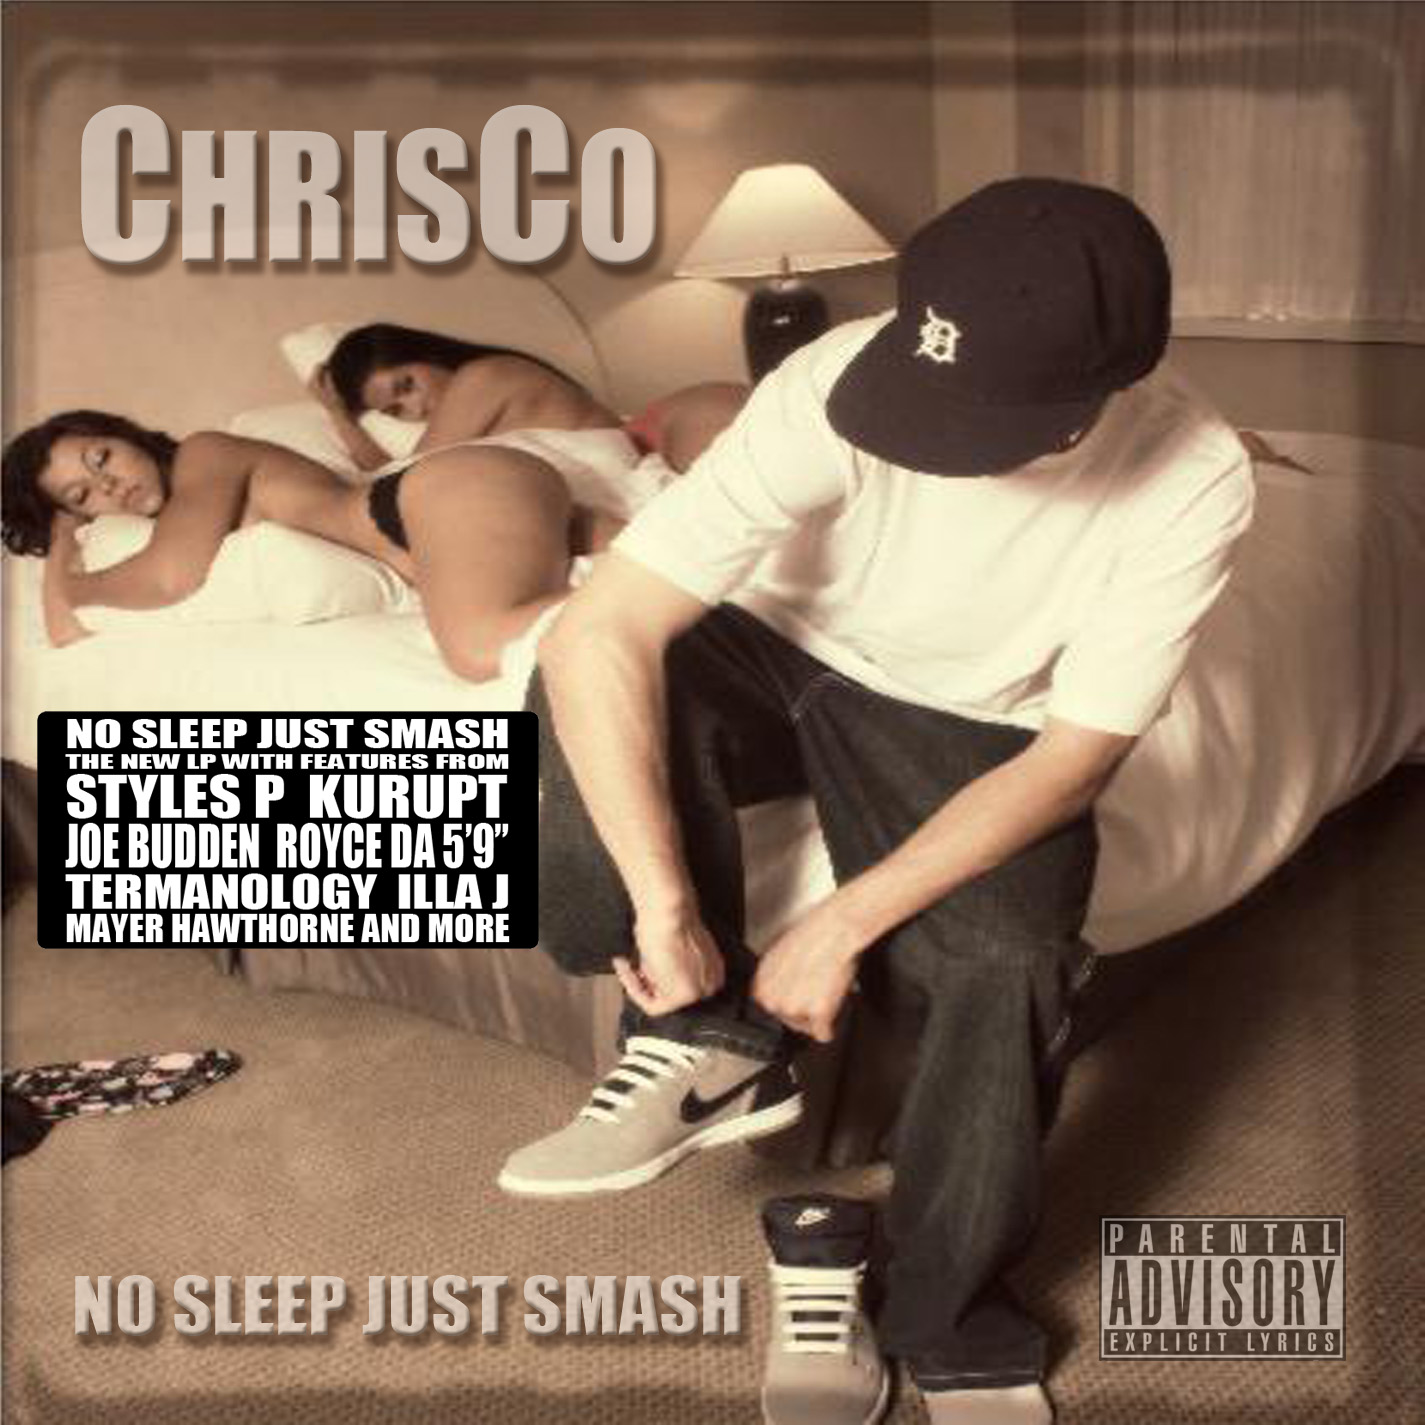 00-Chrisco-No_Sleep_Just_Smash-2009-COVER-REALFREQUENCY.jpg